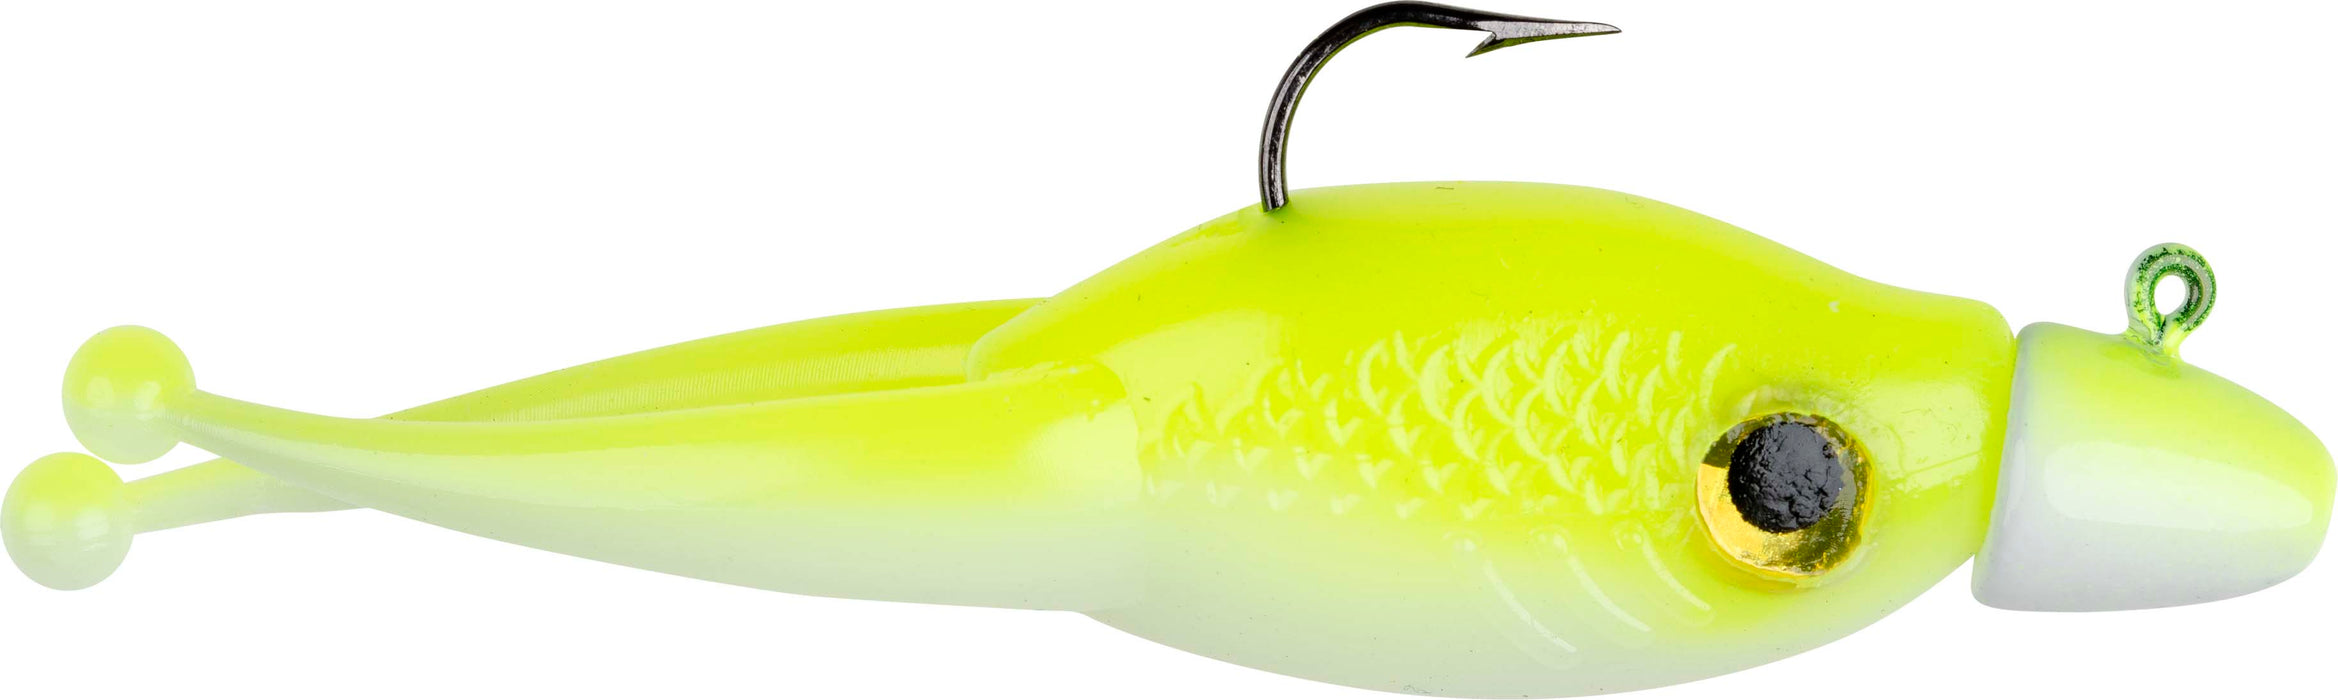 Strike King Mr. Crappie Scizzor Shad Pre-Rigged Jig Head 3 pack